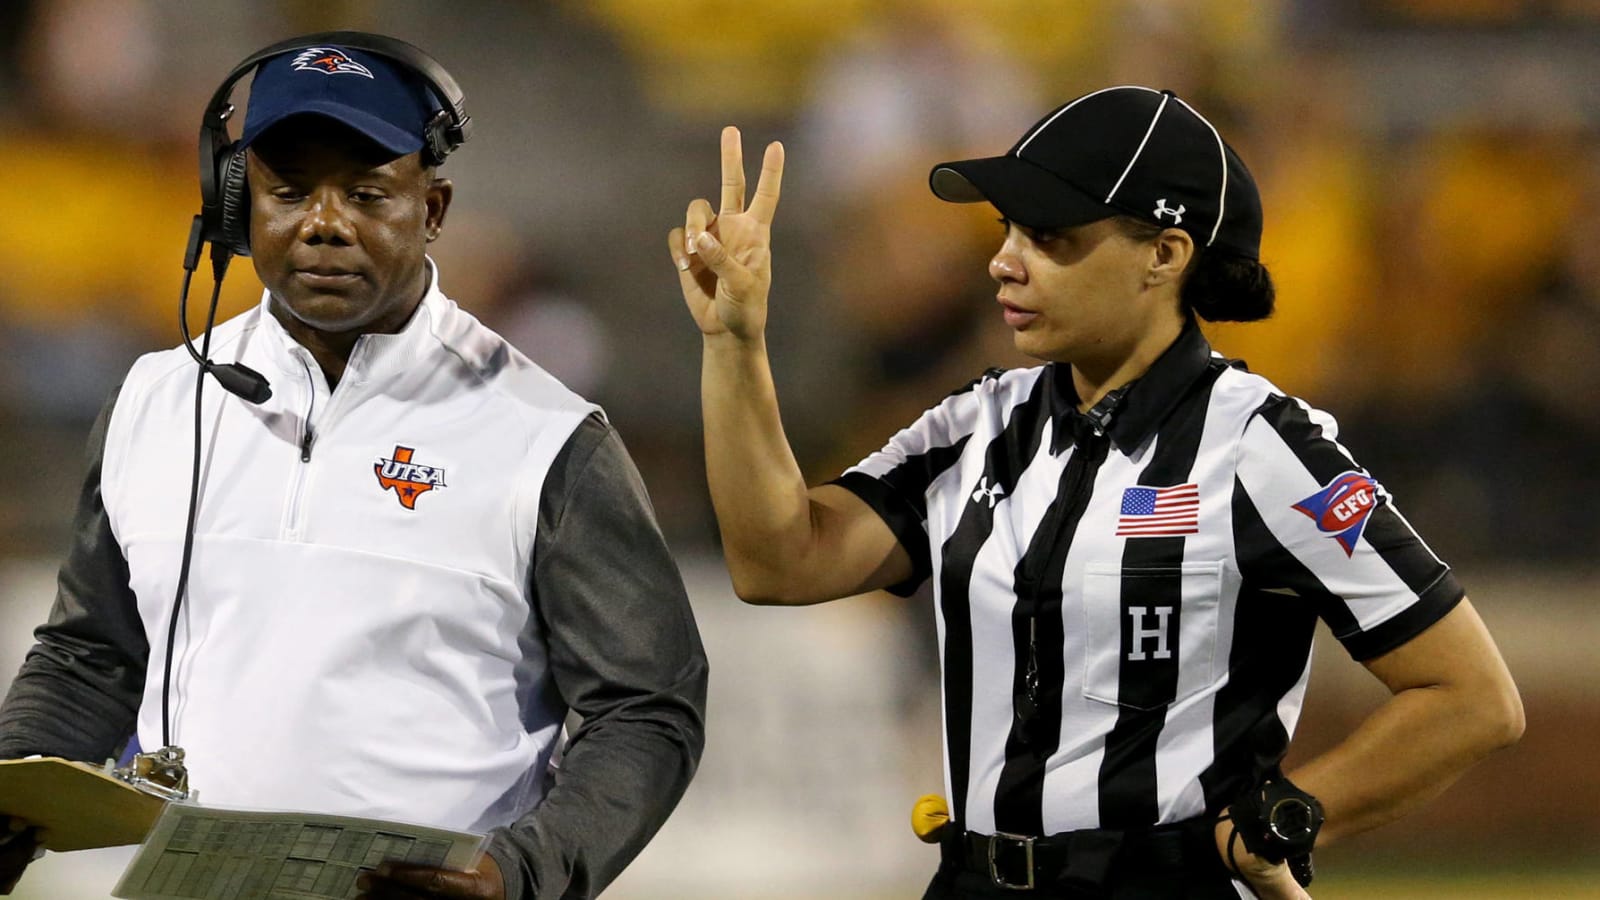 Maia Chaka hired as first Black female official in NFL history